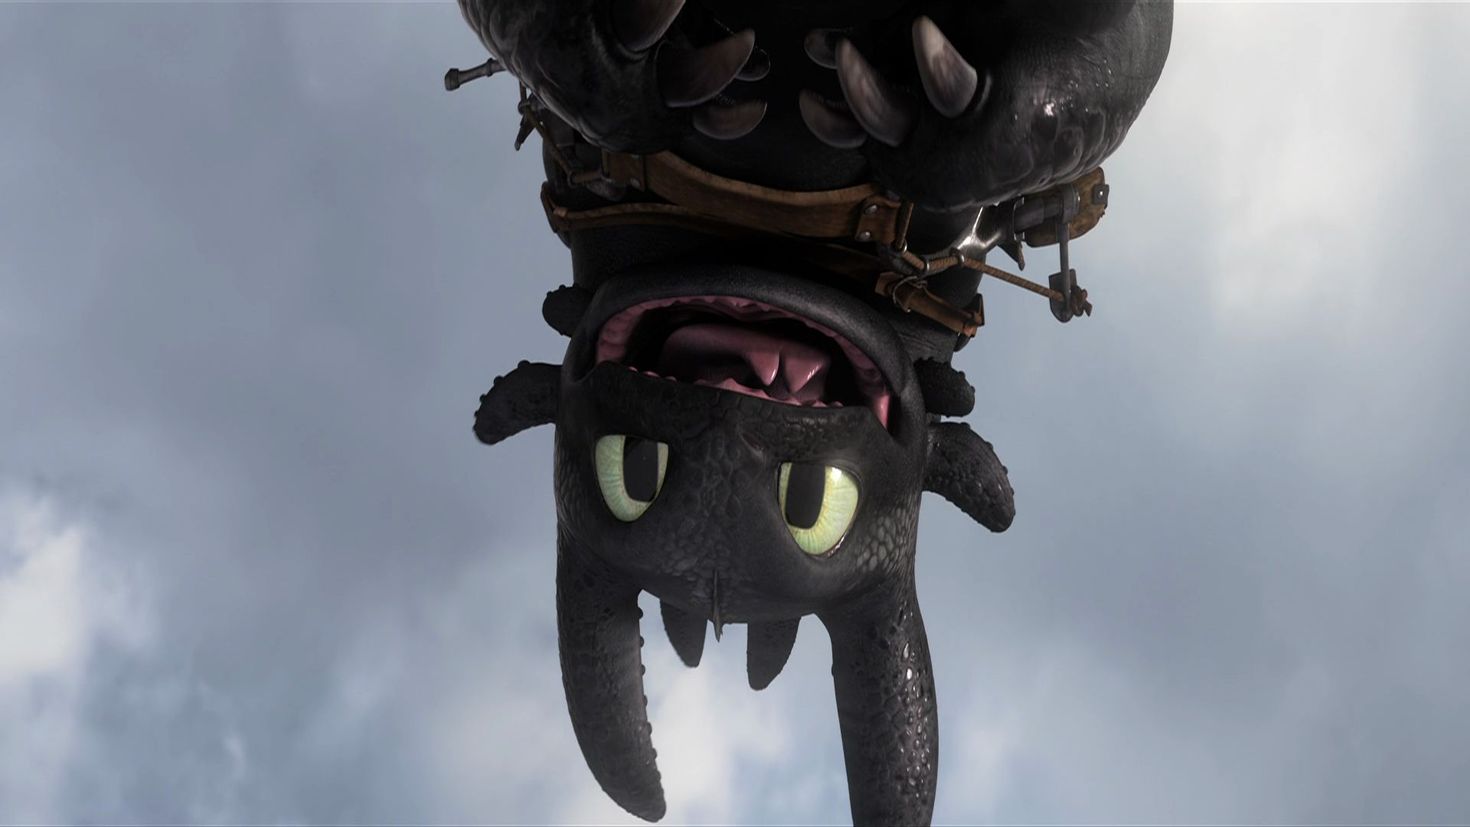 Toothless how to Train your Dragon 3